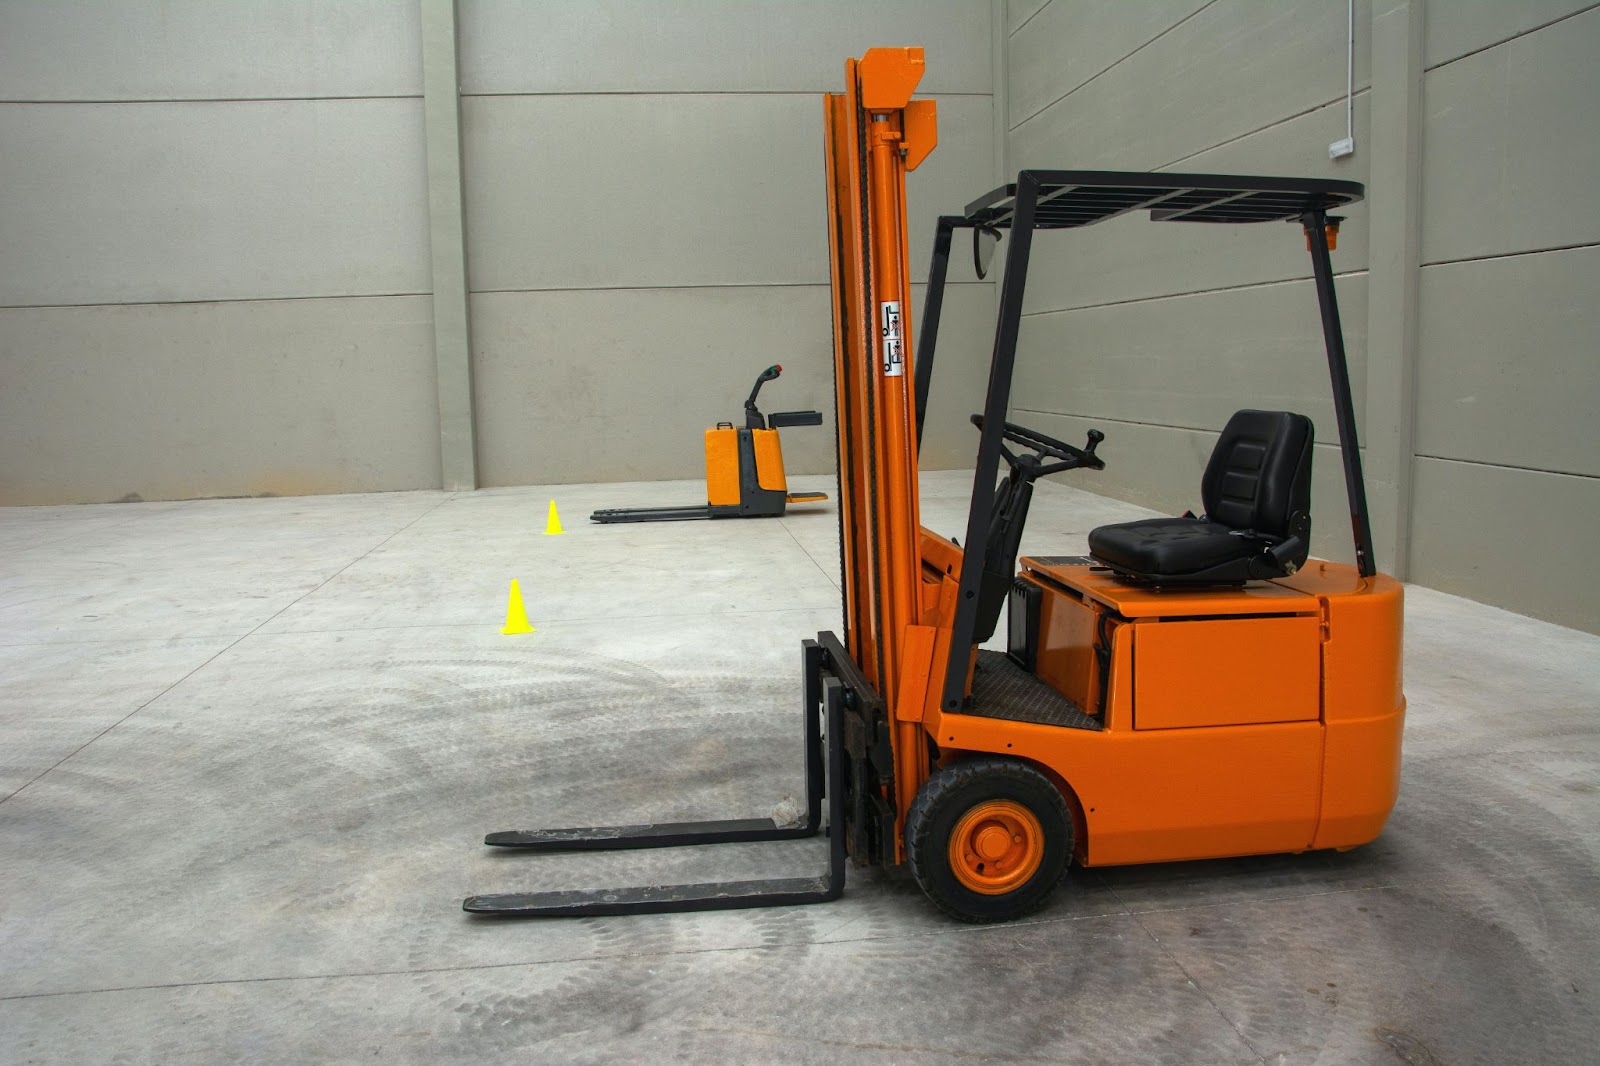 Two forklifts surrounded by yellow cones in an empty warehouse